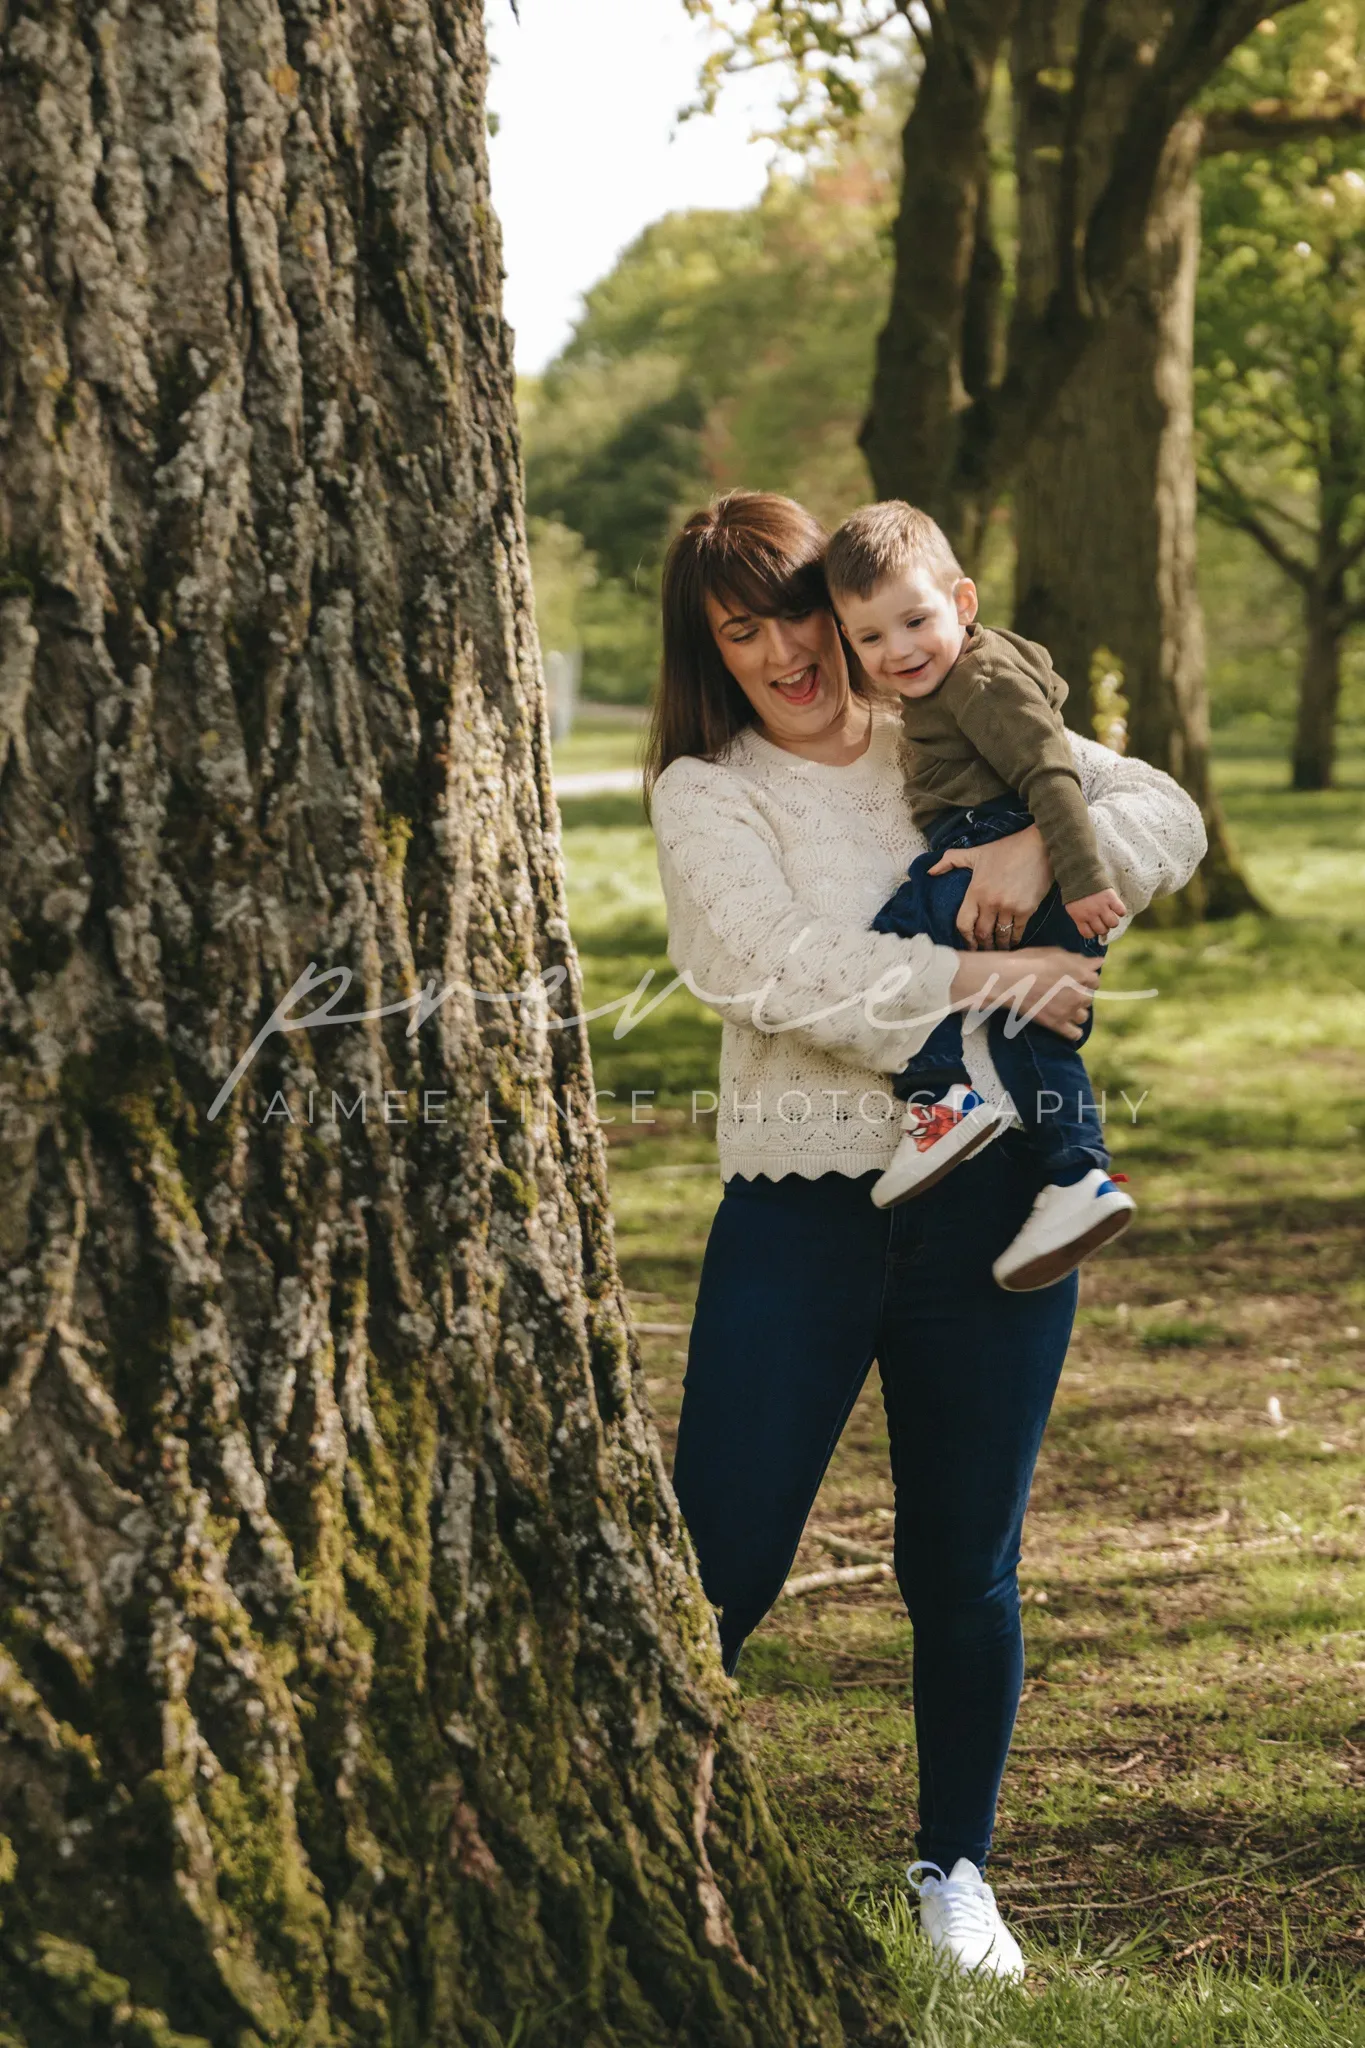 A woman in a black top and blue jeans holds a young boy in a sweater and jeans next to a large tree in a sunlit park, both smiling joyfully. the watermark "aimee l. photography" appears on the image.